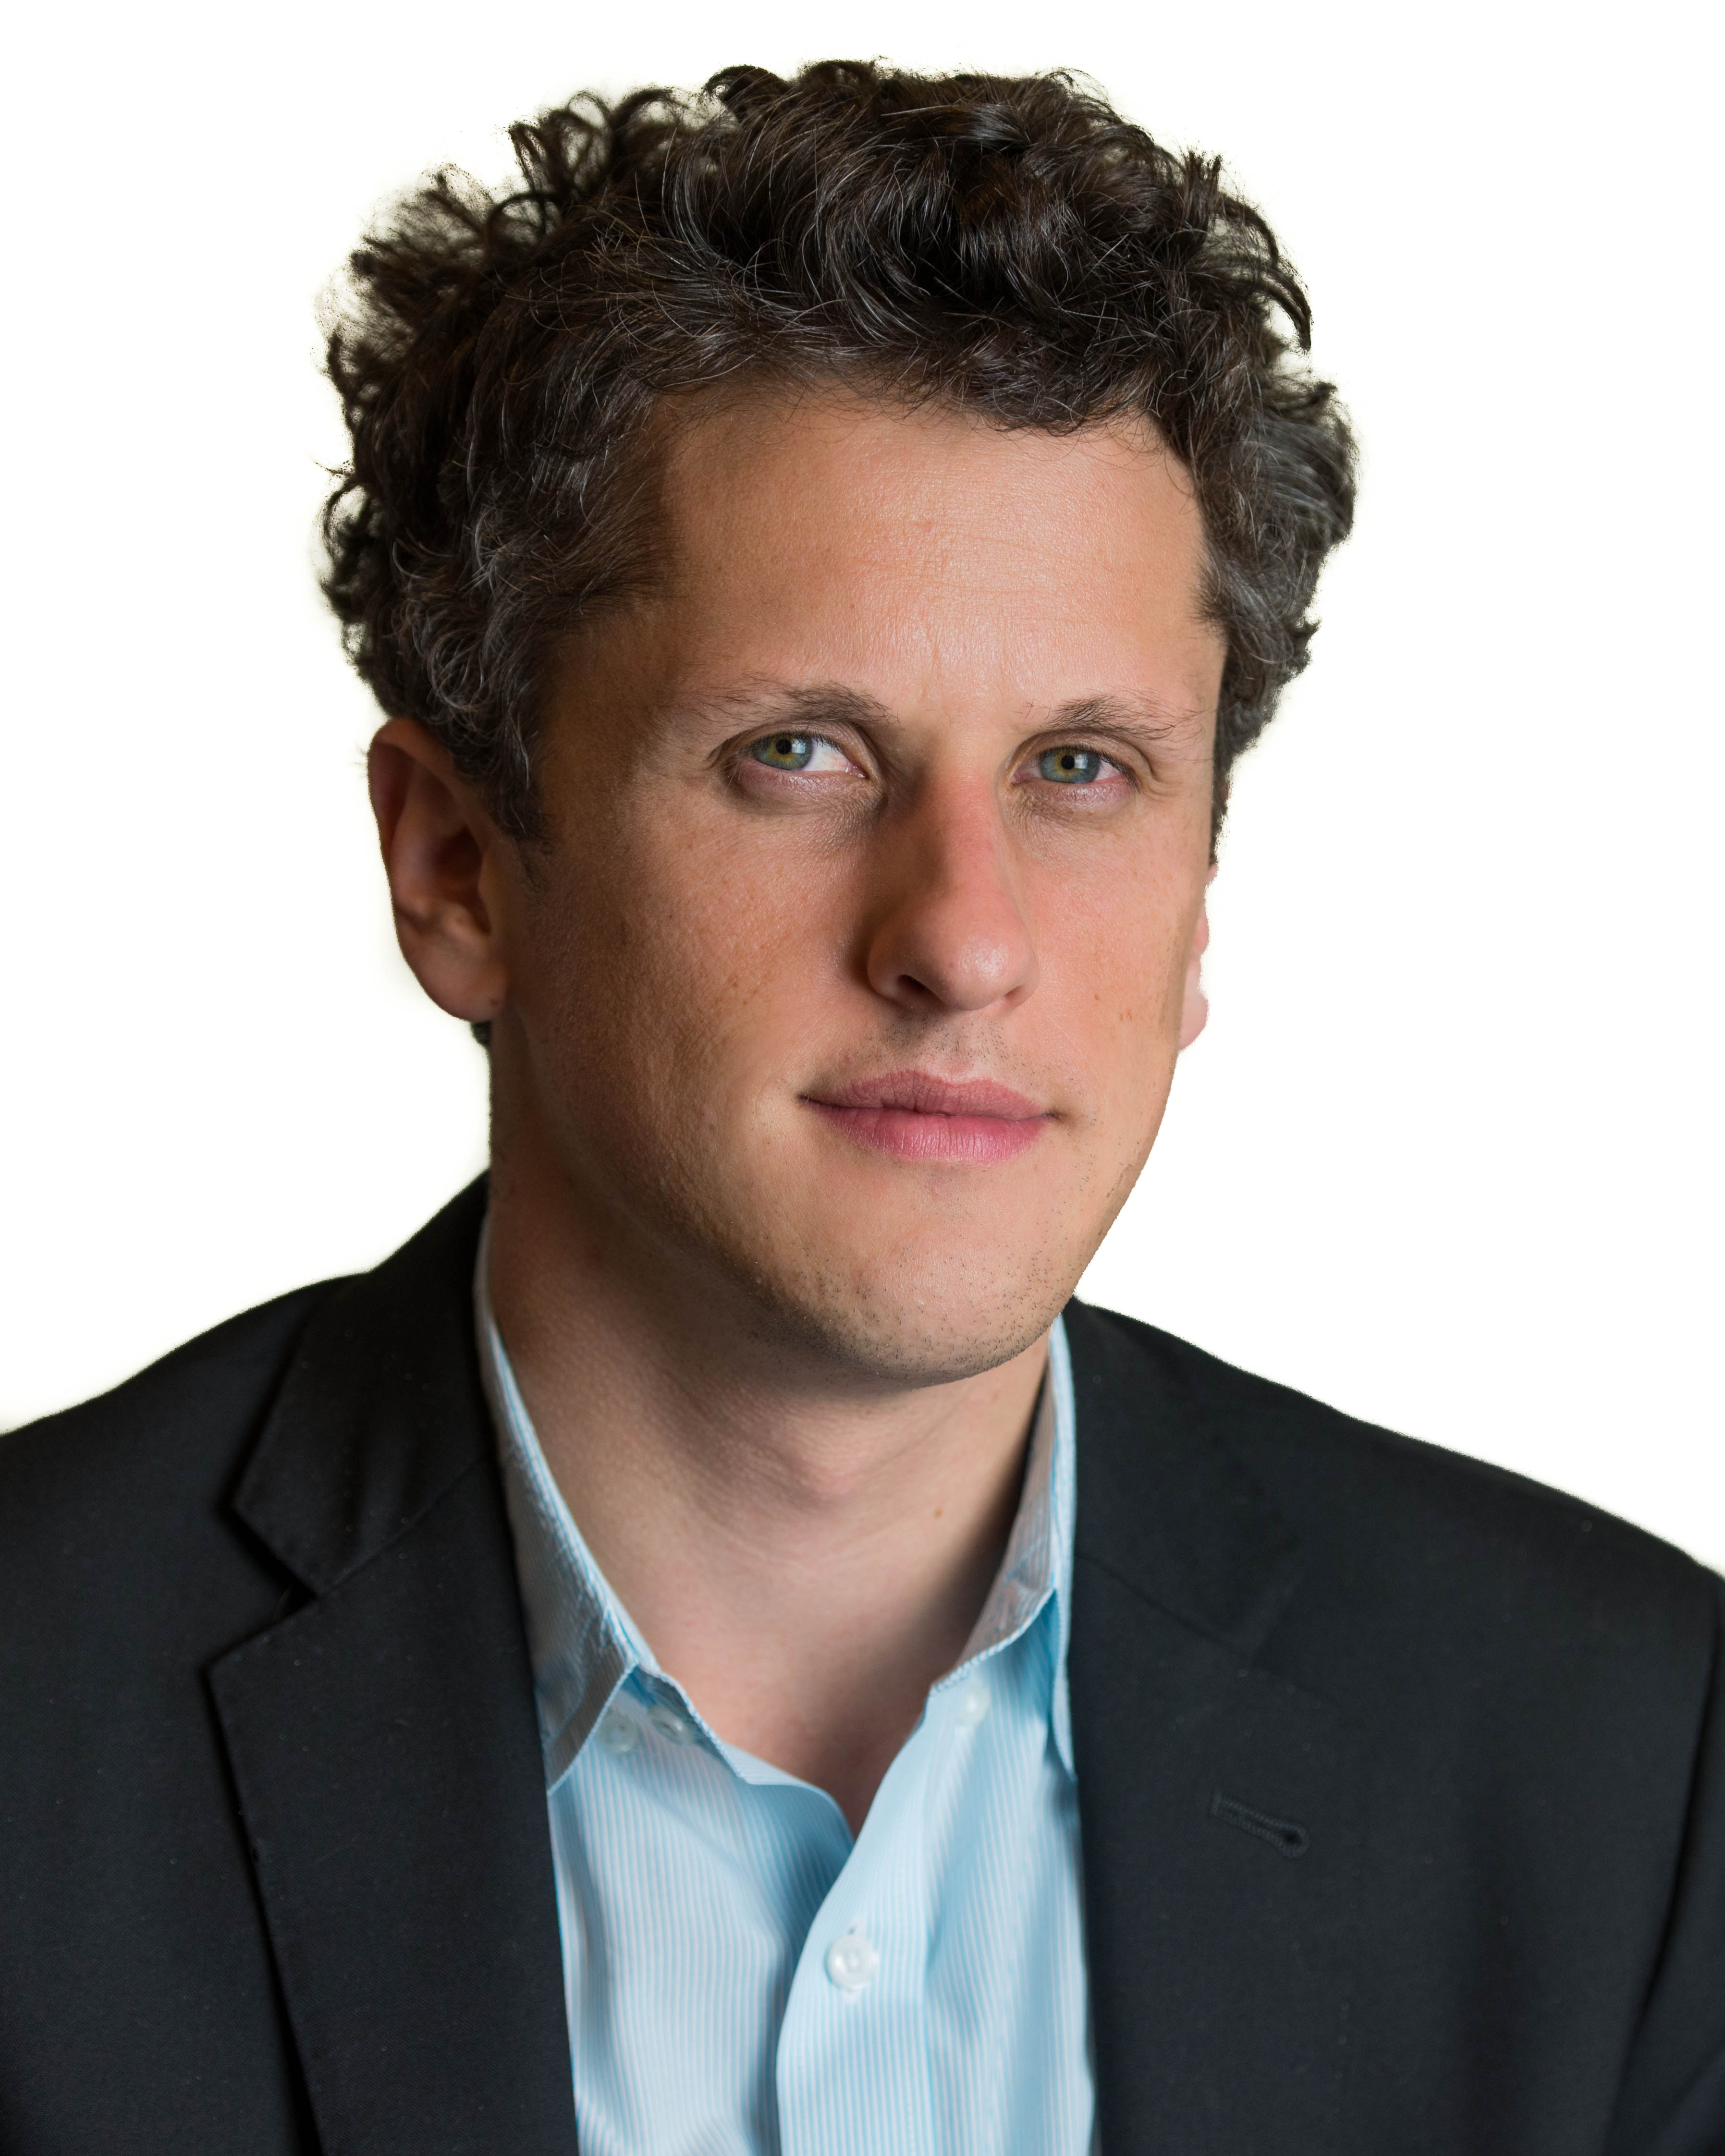 box-co-founder-and-ceo-aaron-levie.jpg